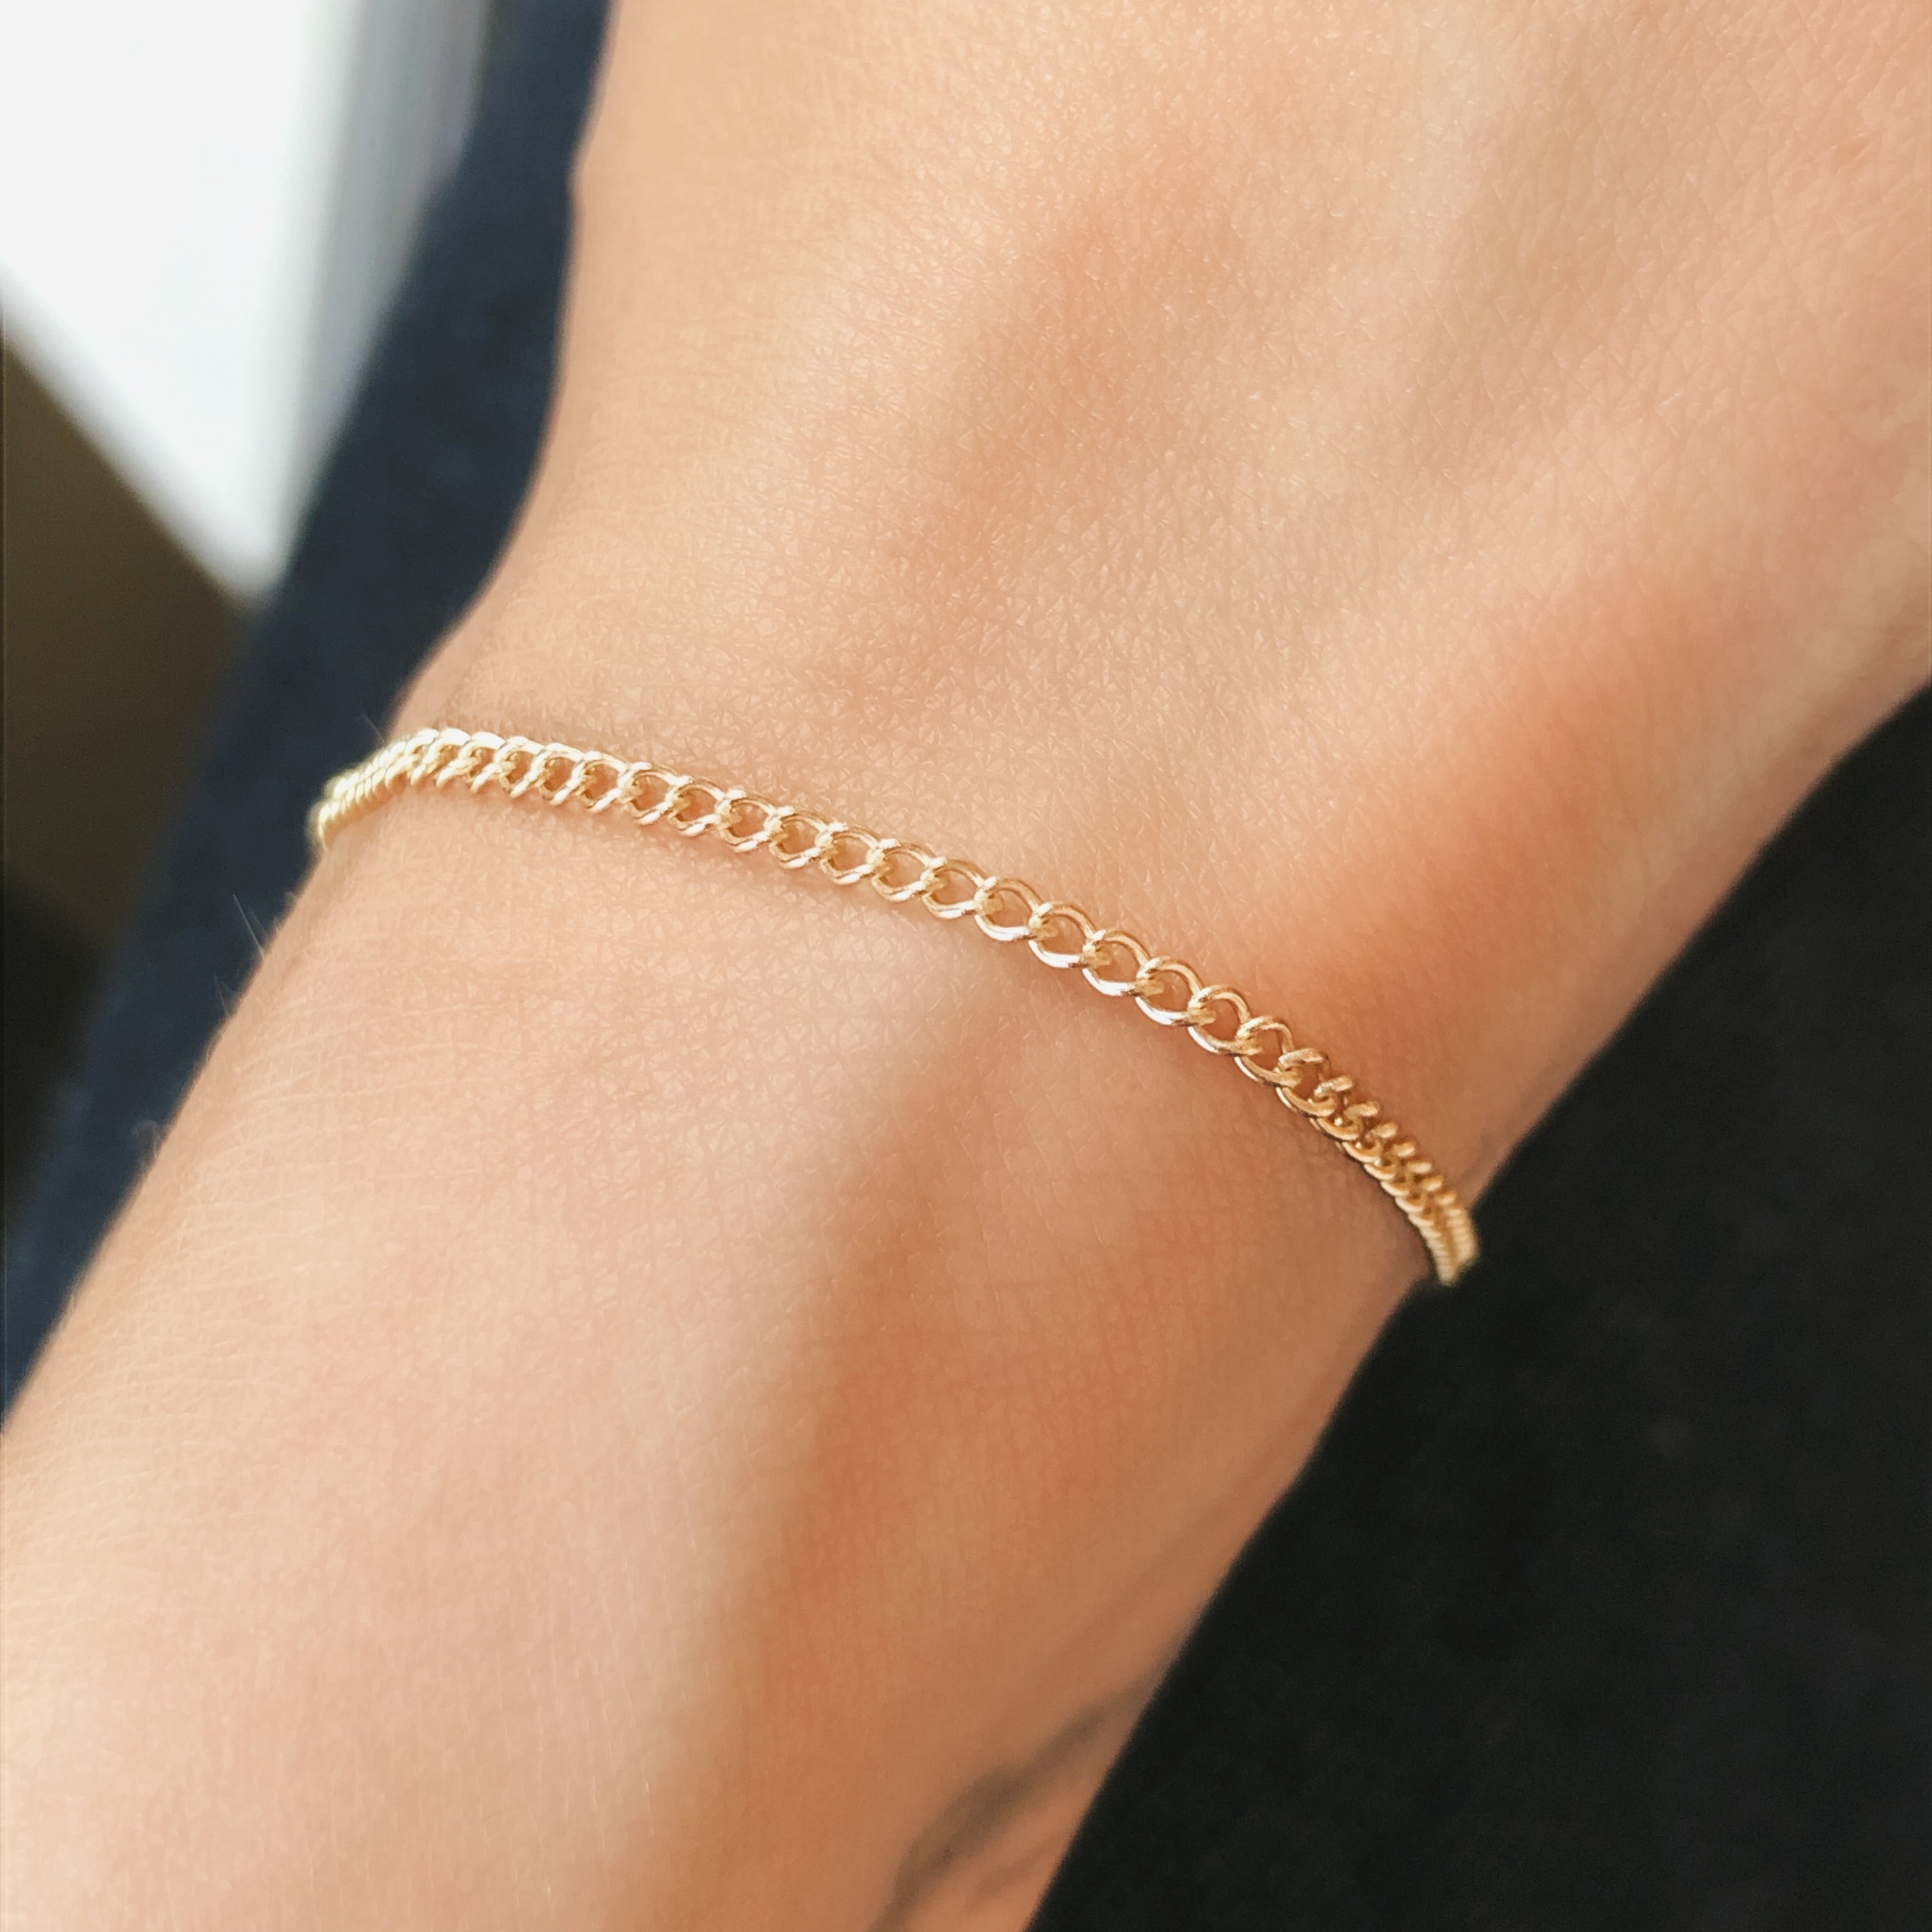 Add Permanent Bracelets to Your Jewelry Collection - Halstead